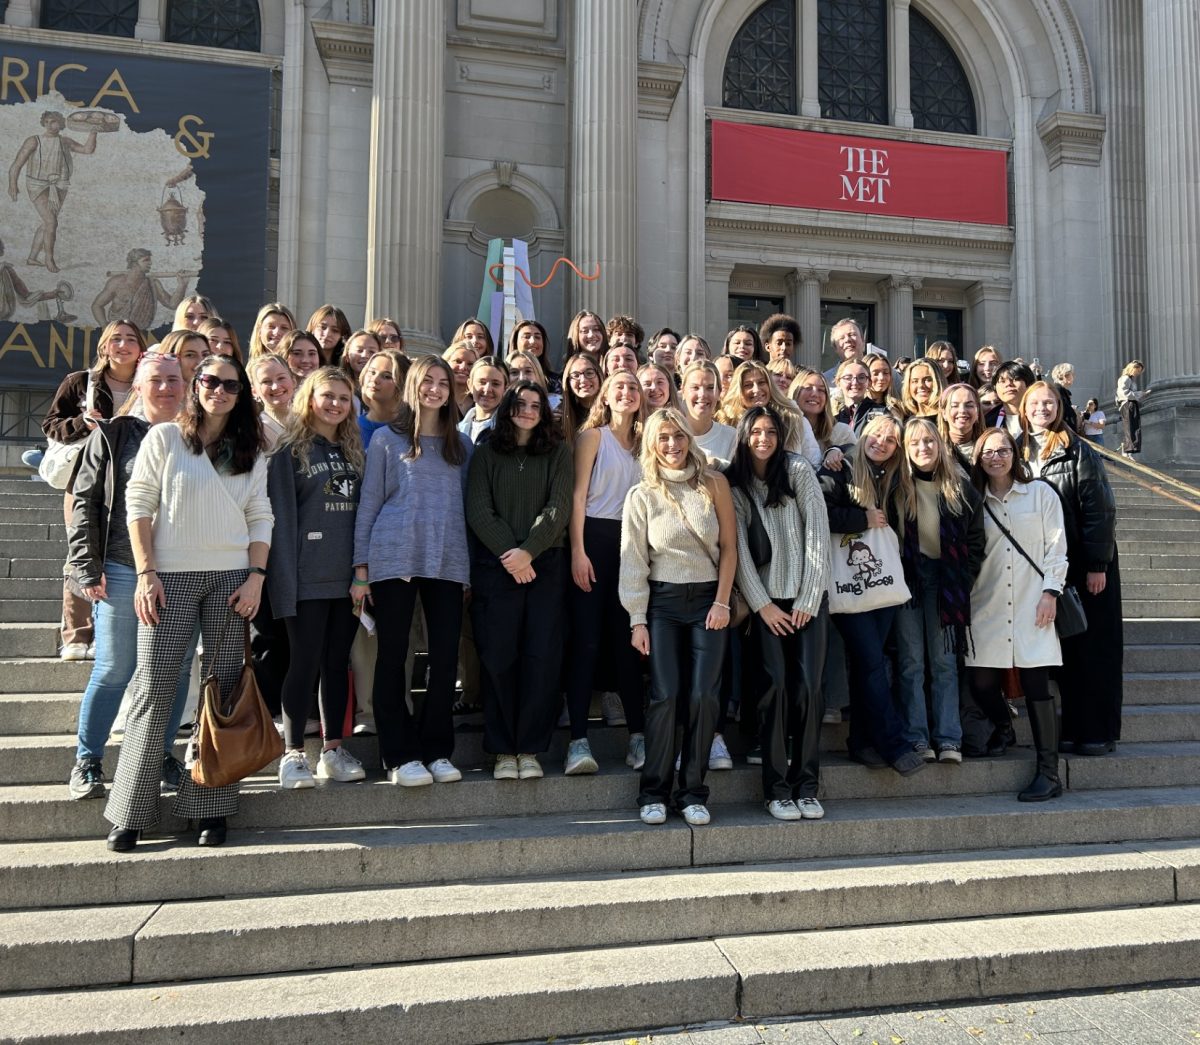 Two JC student groups visit New York City